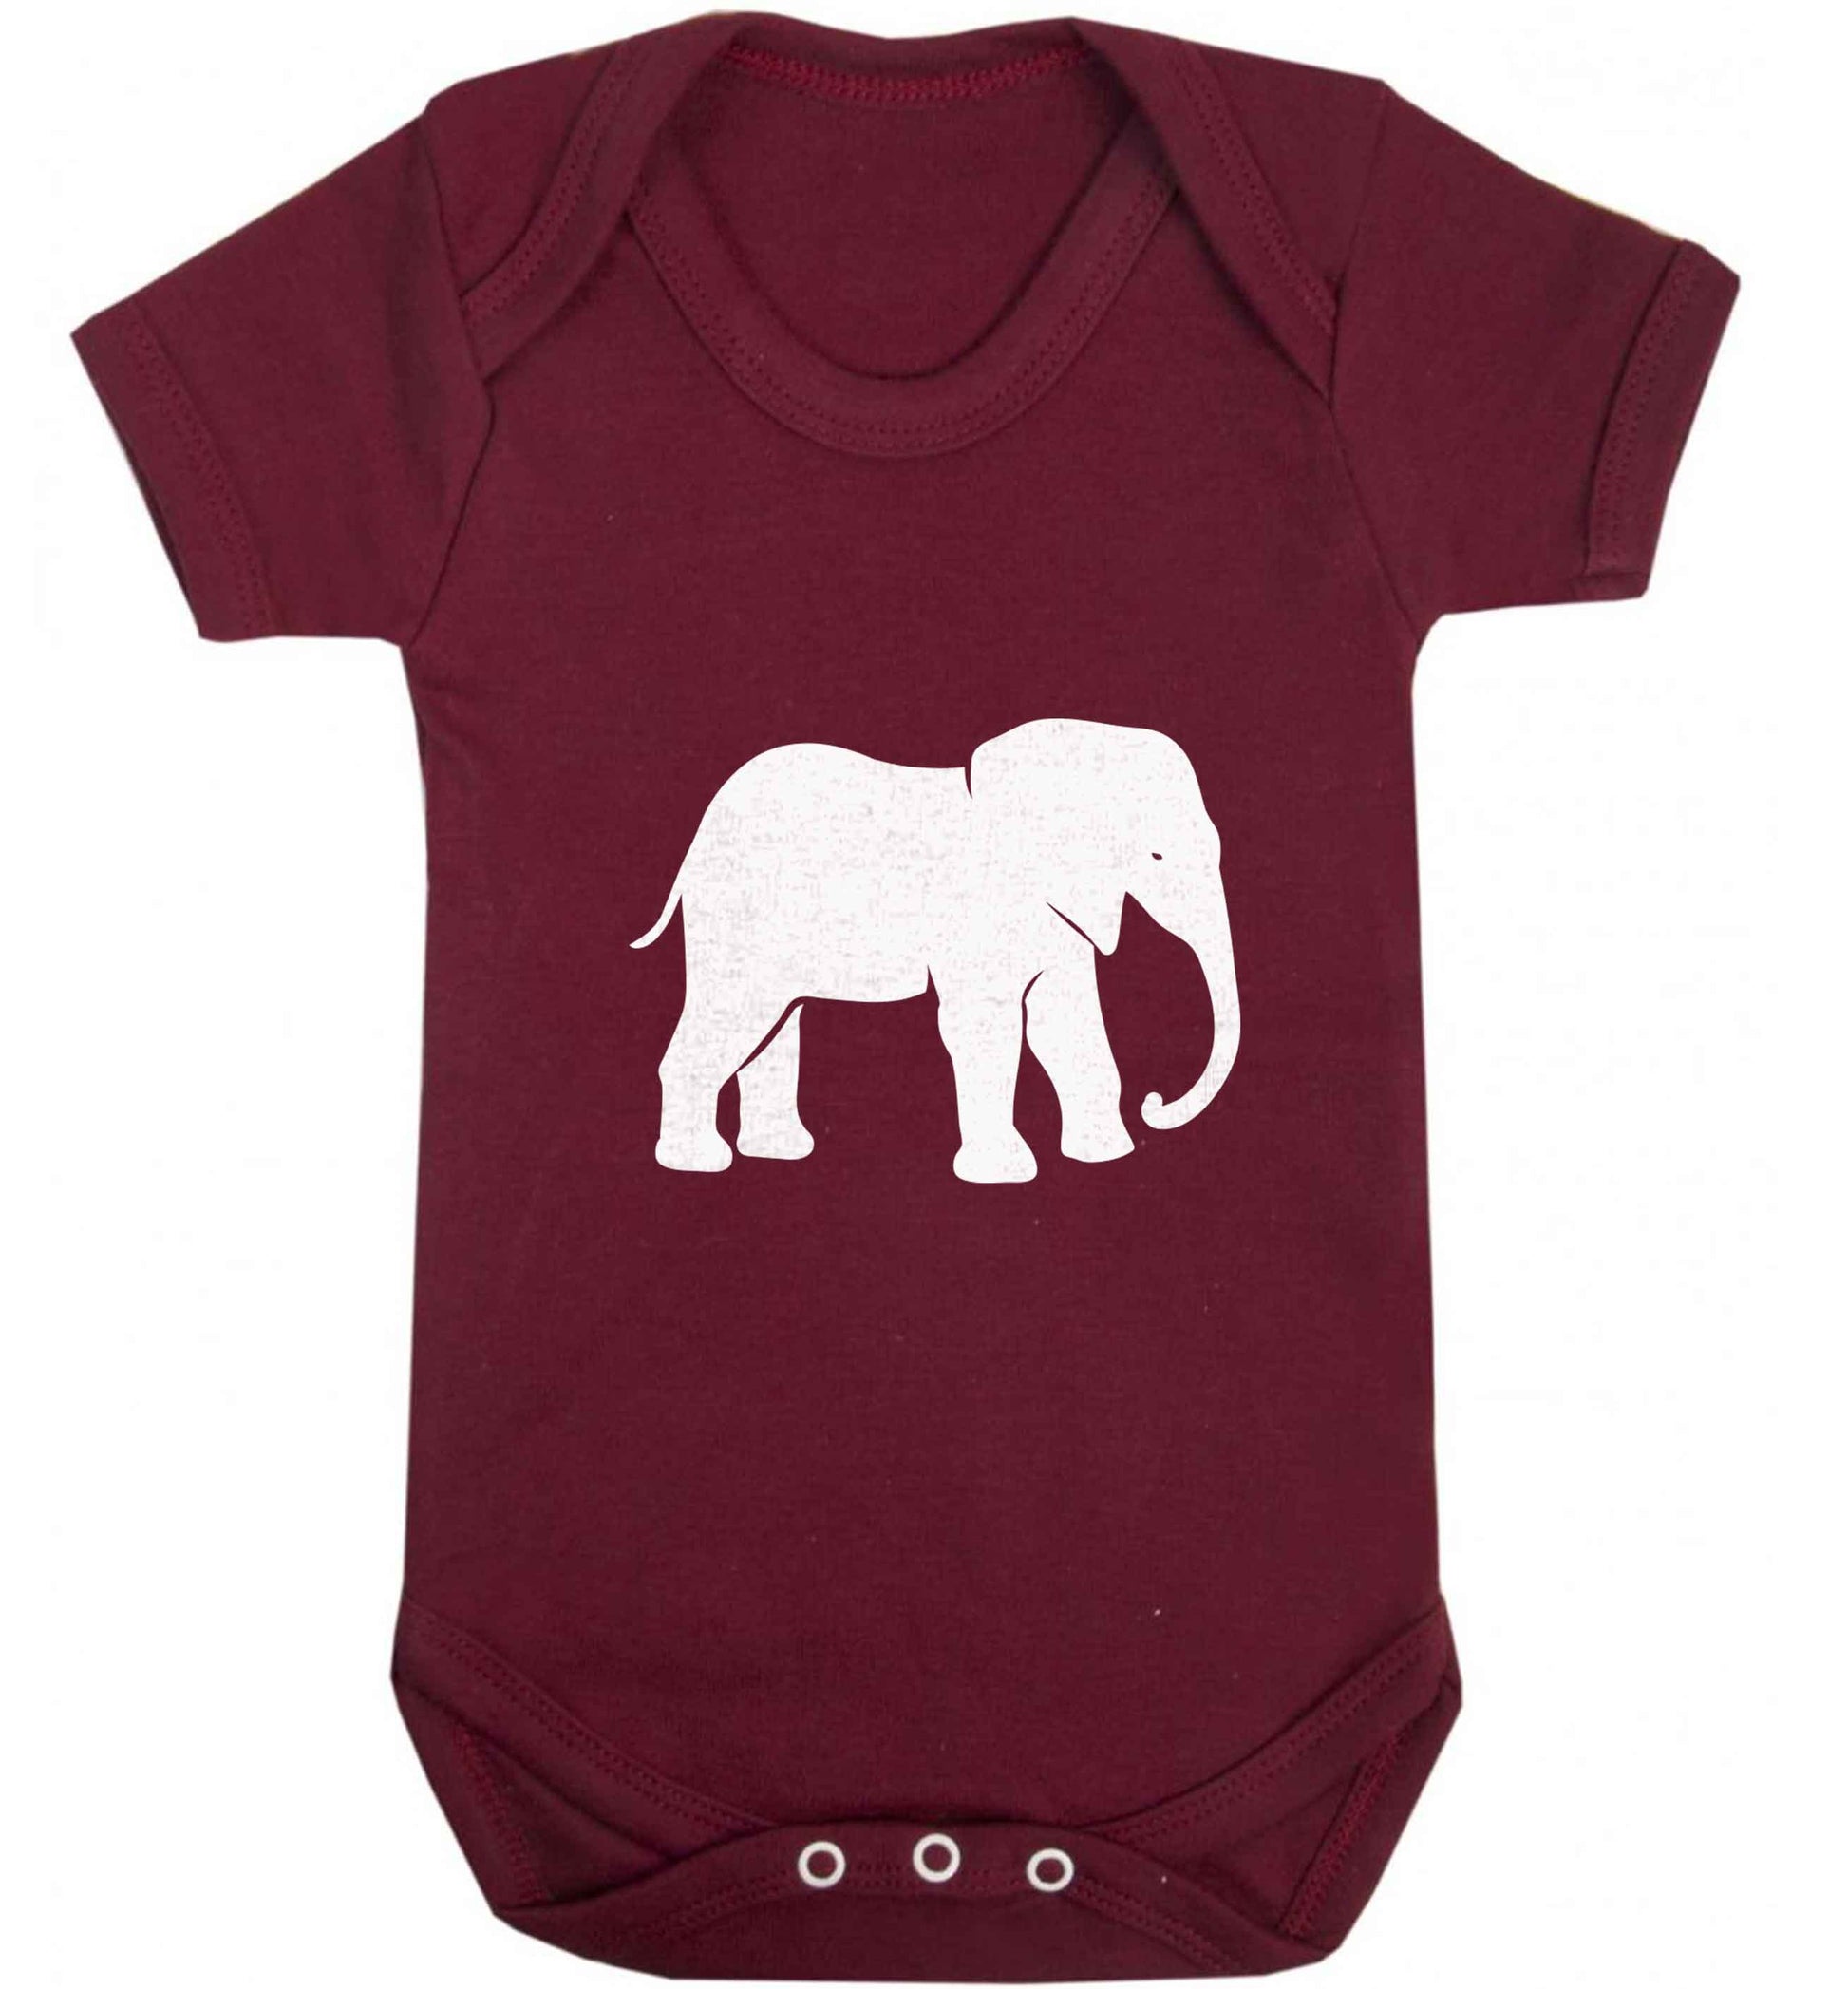 Pink elephant baby vest maroon 18-24 months